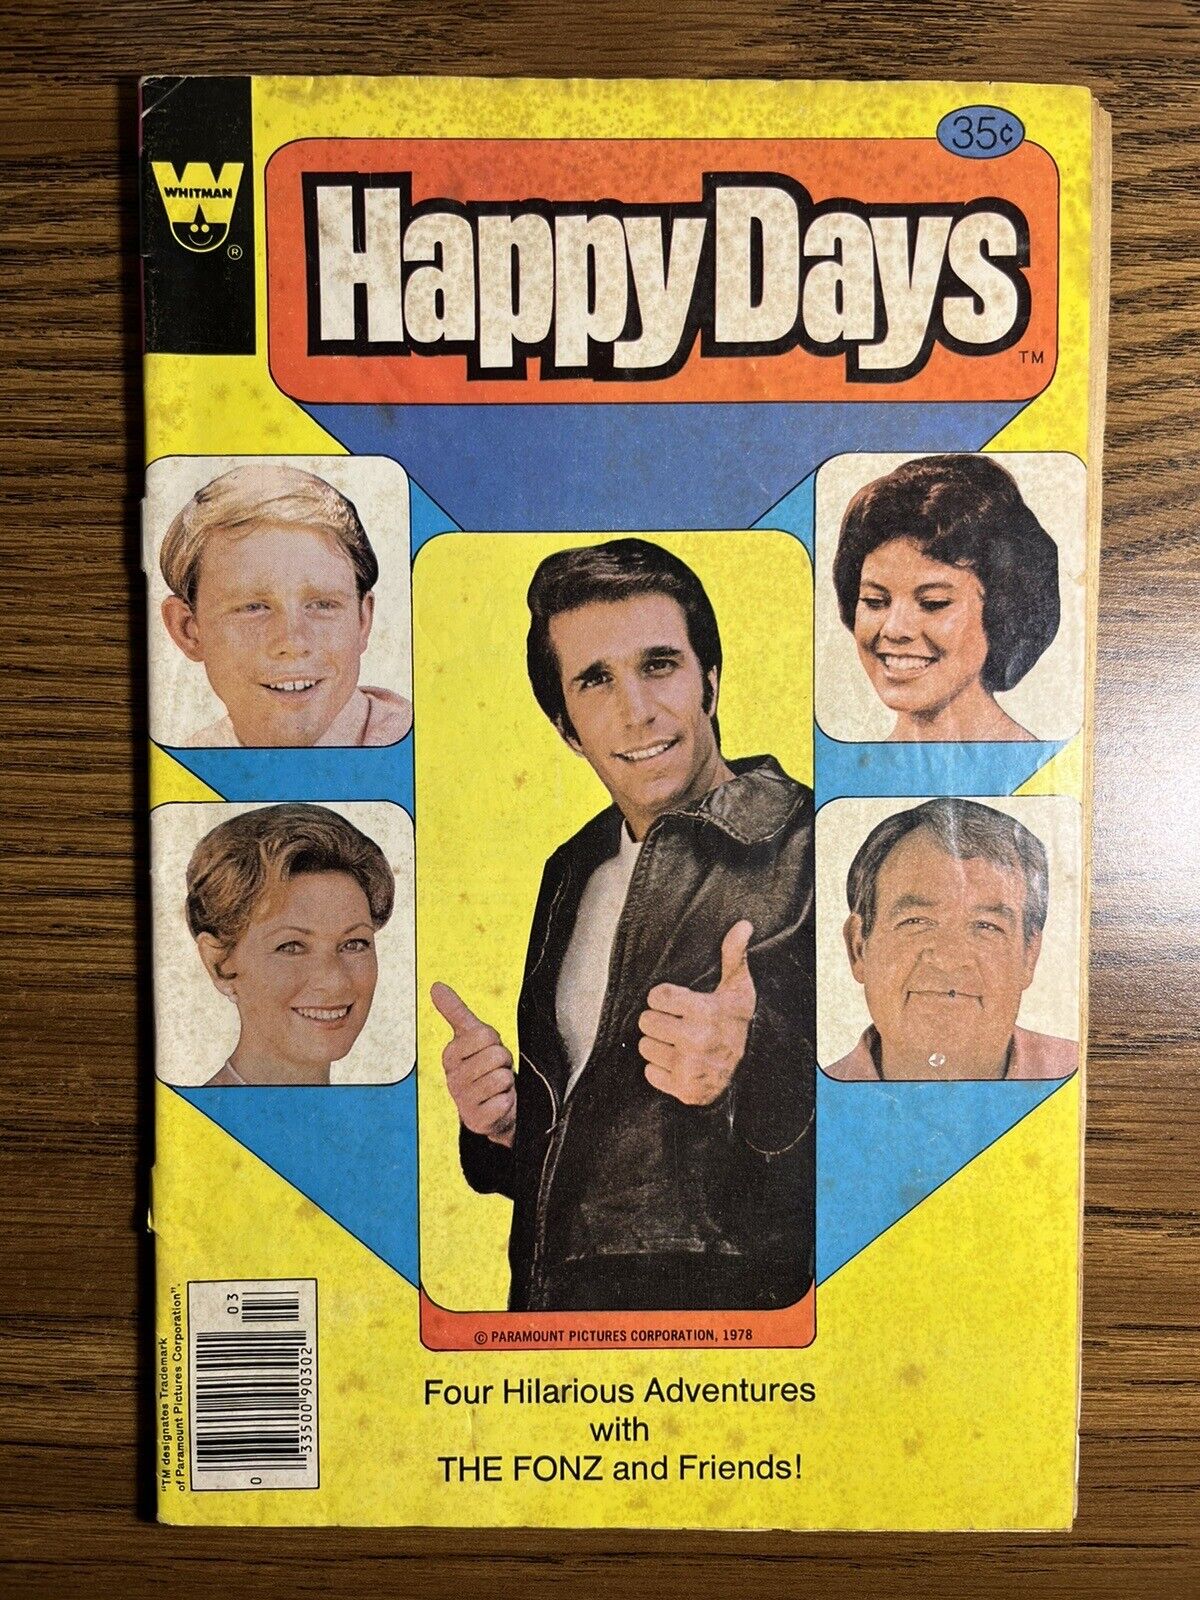 HAPPY DAYS 1 NEWSSTAND FONZ AND FRIENDS WESTERN GOLD KEY COMICS 1979 VINTAGE